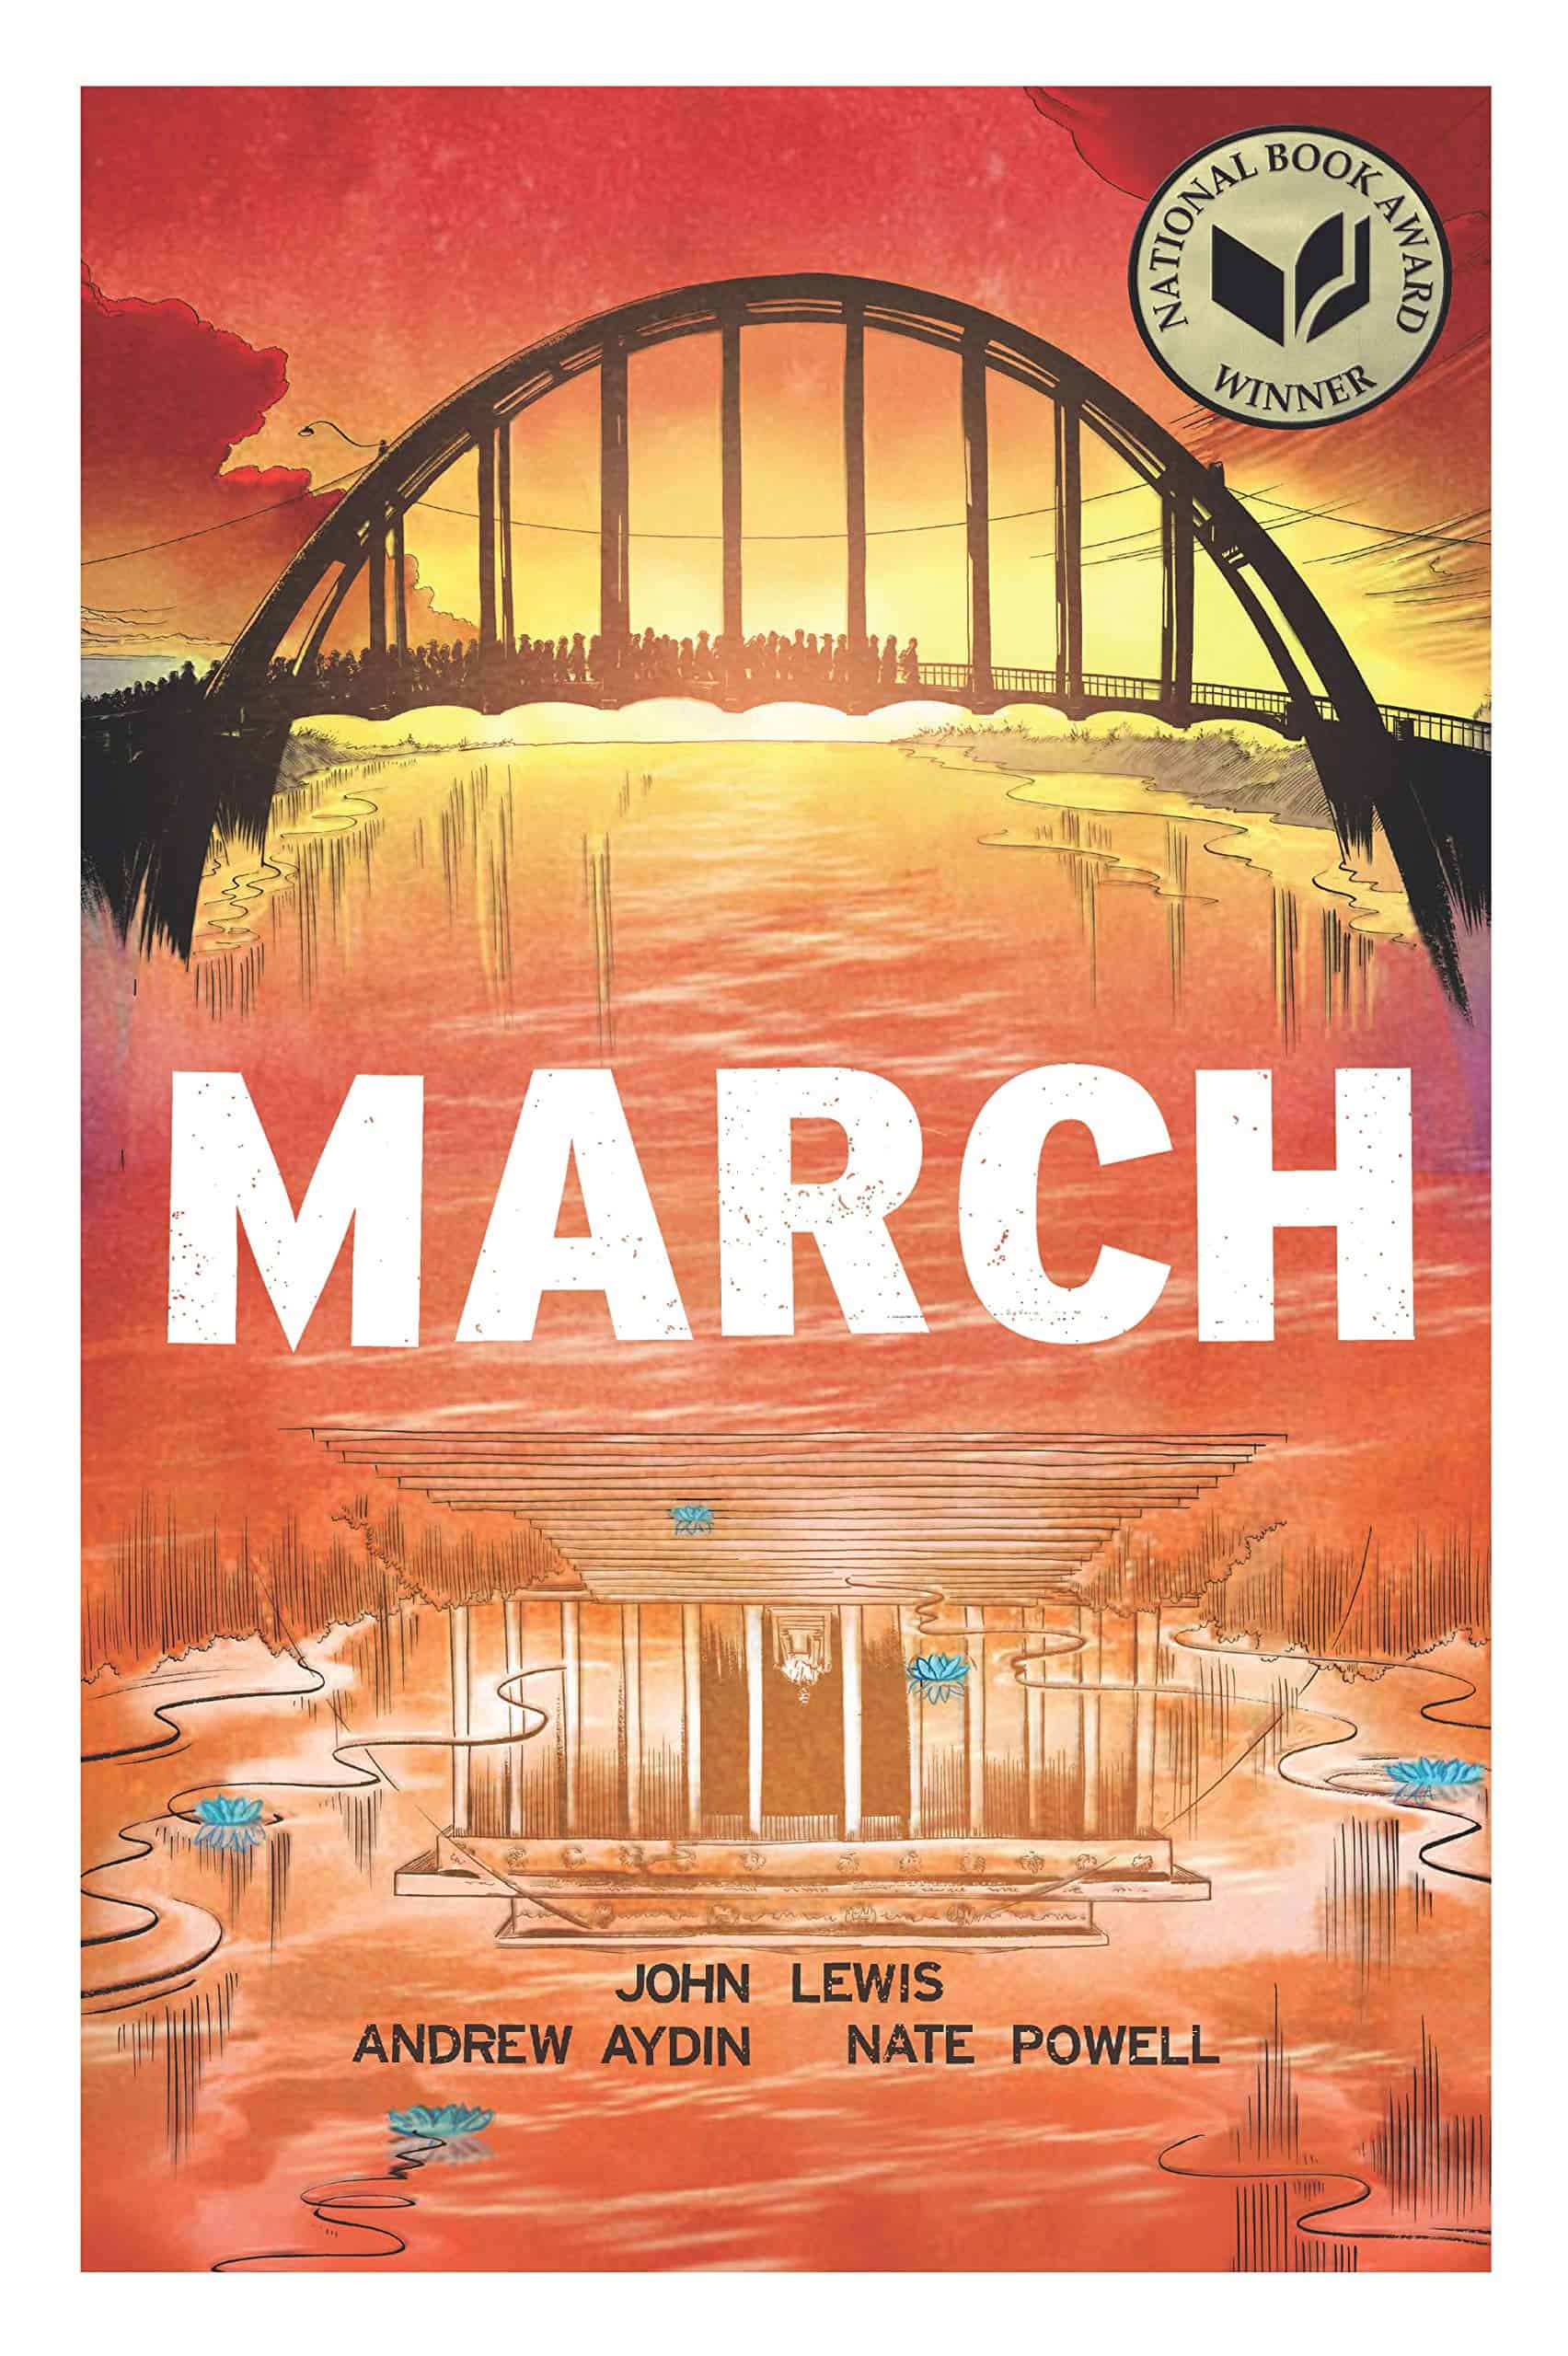 John Lewis, March Trilogy, Best Indie Comics Decade Smithsonian IDW